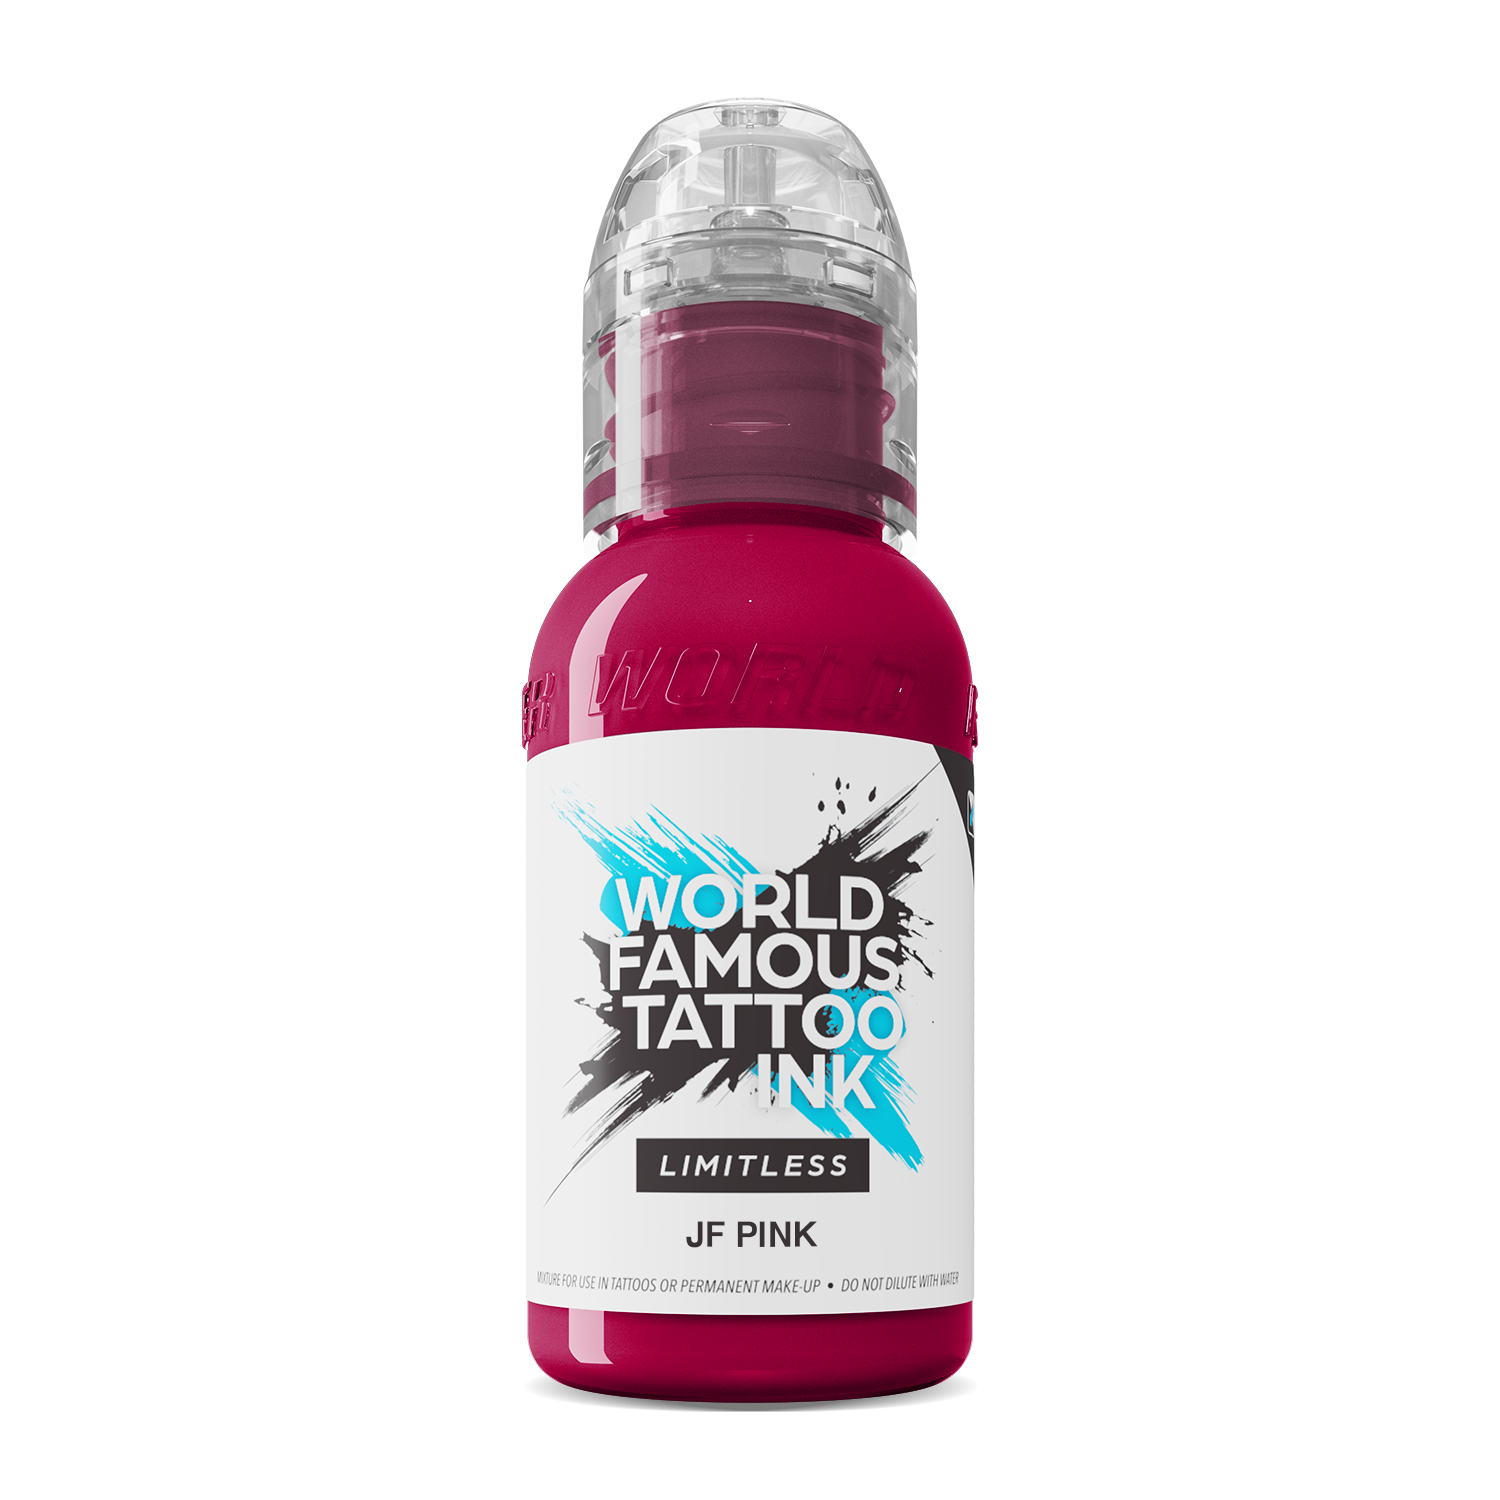 World Famous - Limitless Tattoo Ink - JF Pink - 30 ml